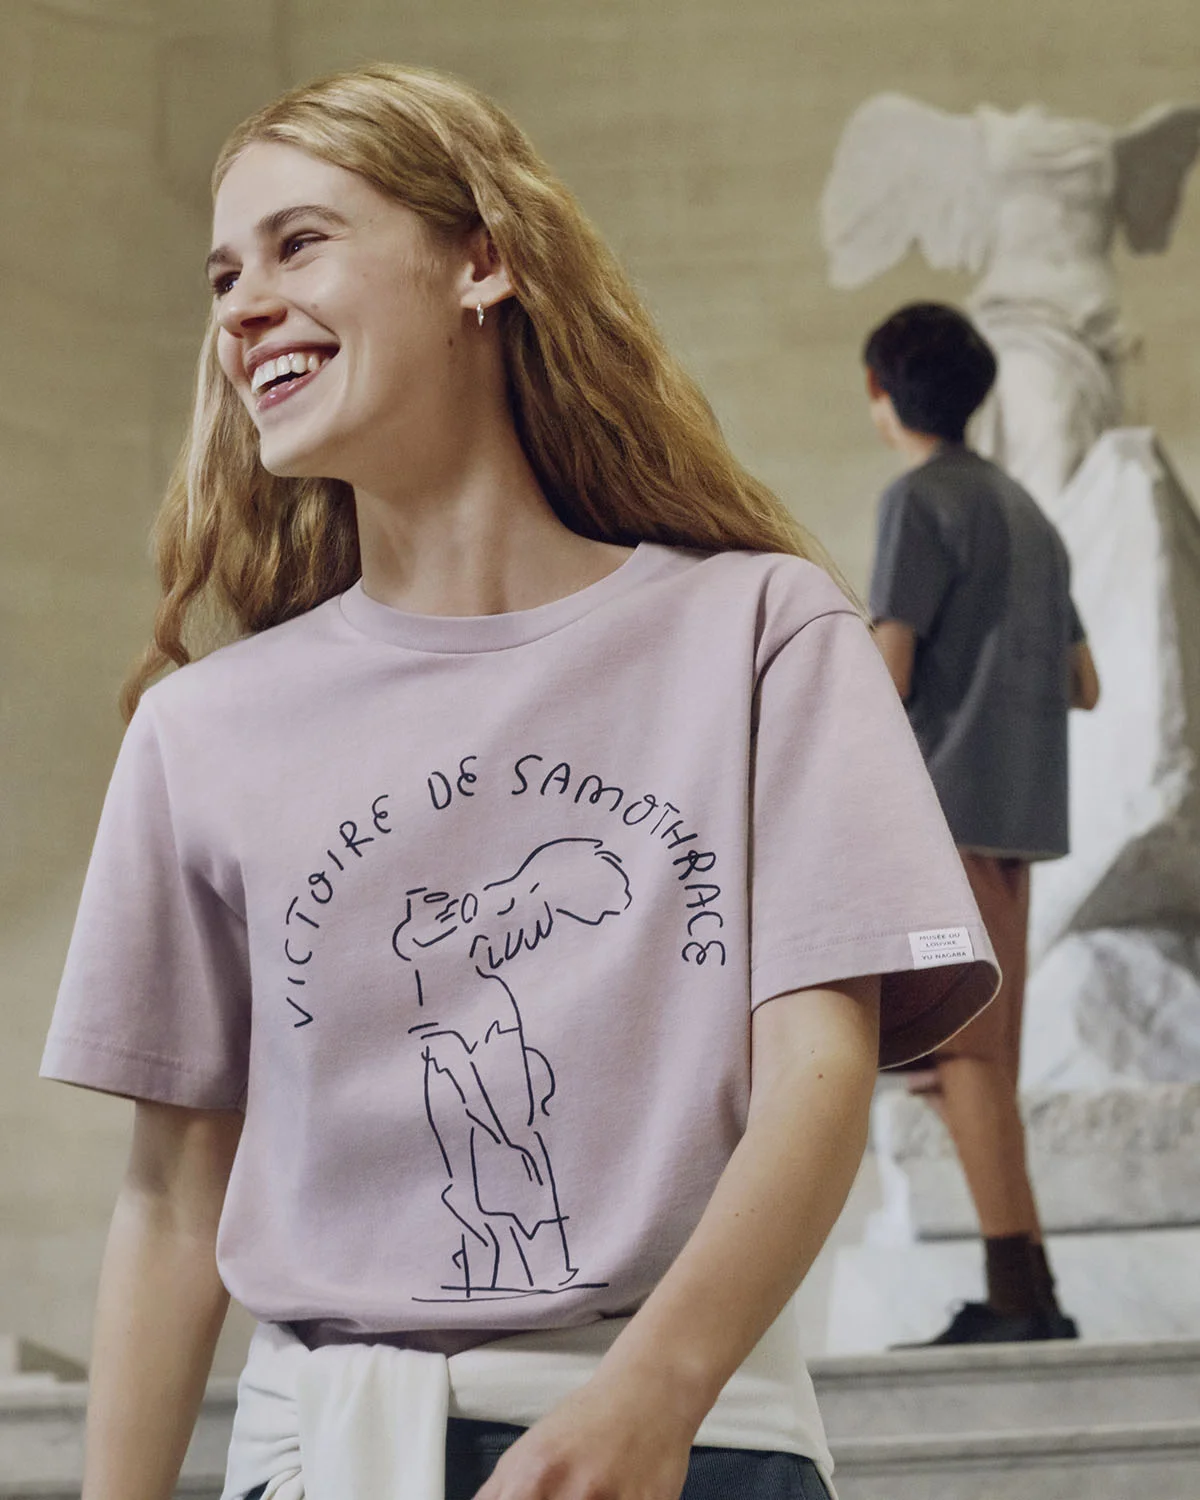 The new Uniqlo x Louvre Museum collab seen by the artist Yu Nabaga